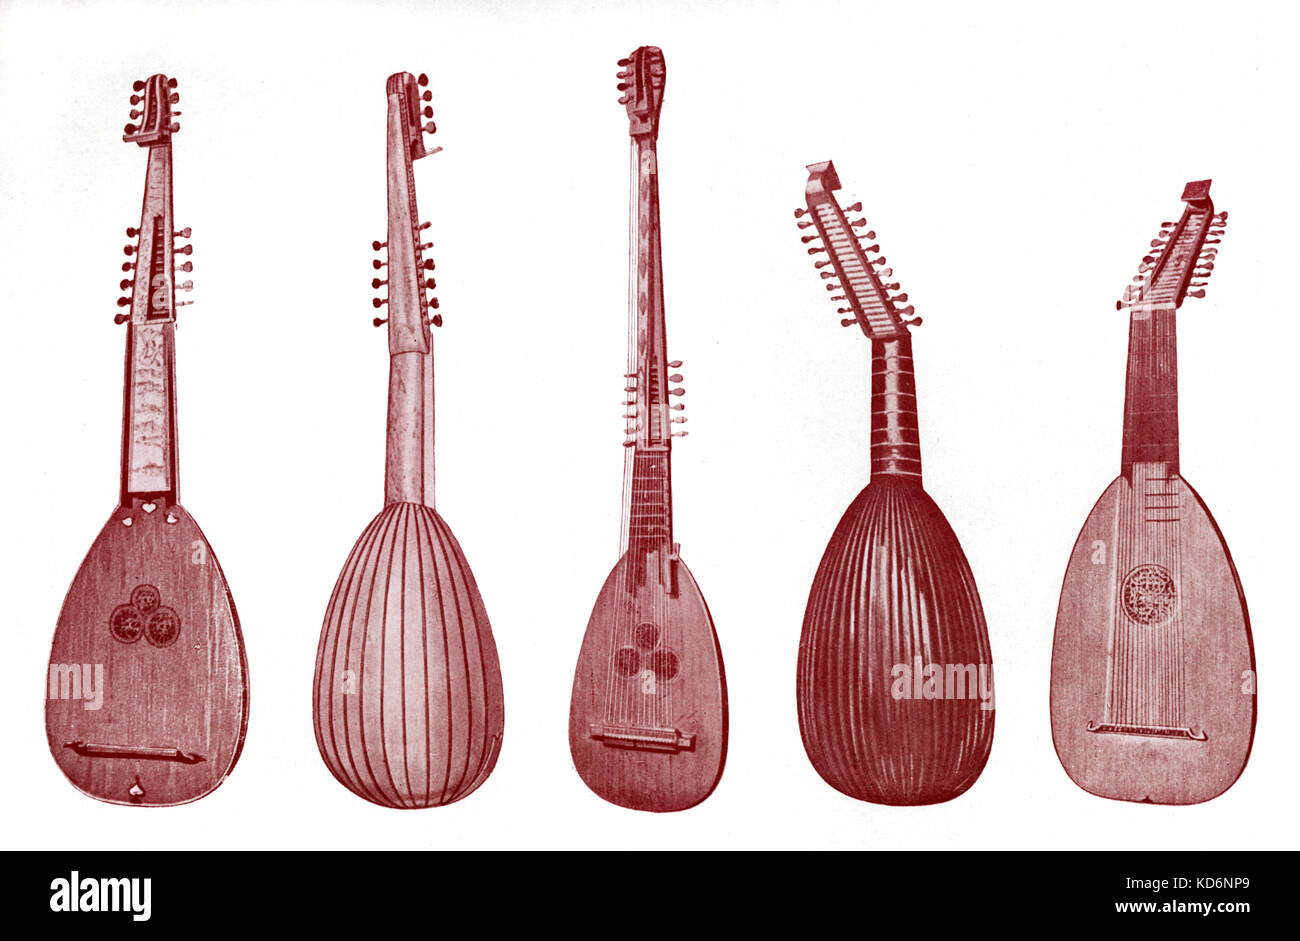 Lutes - front and back - Theorbo, chitarrone and archlute, Stock Photo